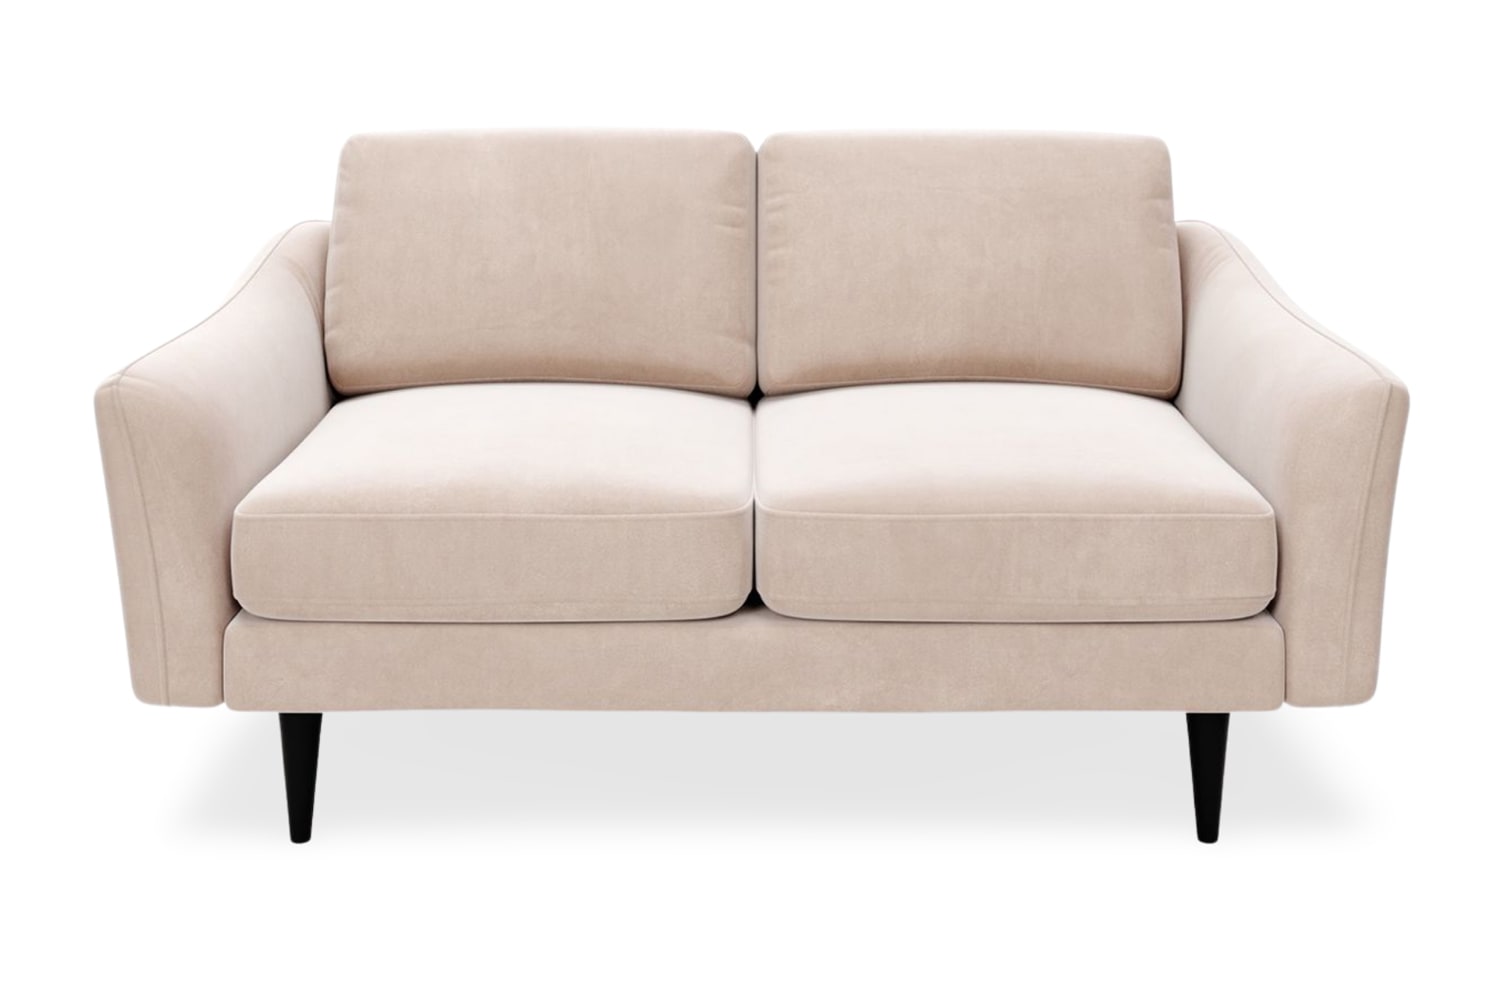 SNUG | The Rebel 2 Seater Sofa in Taupe variant_40414889902128